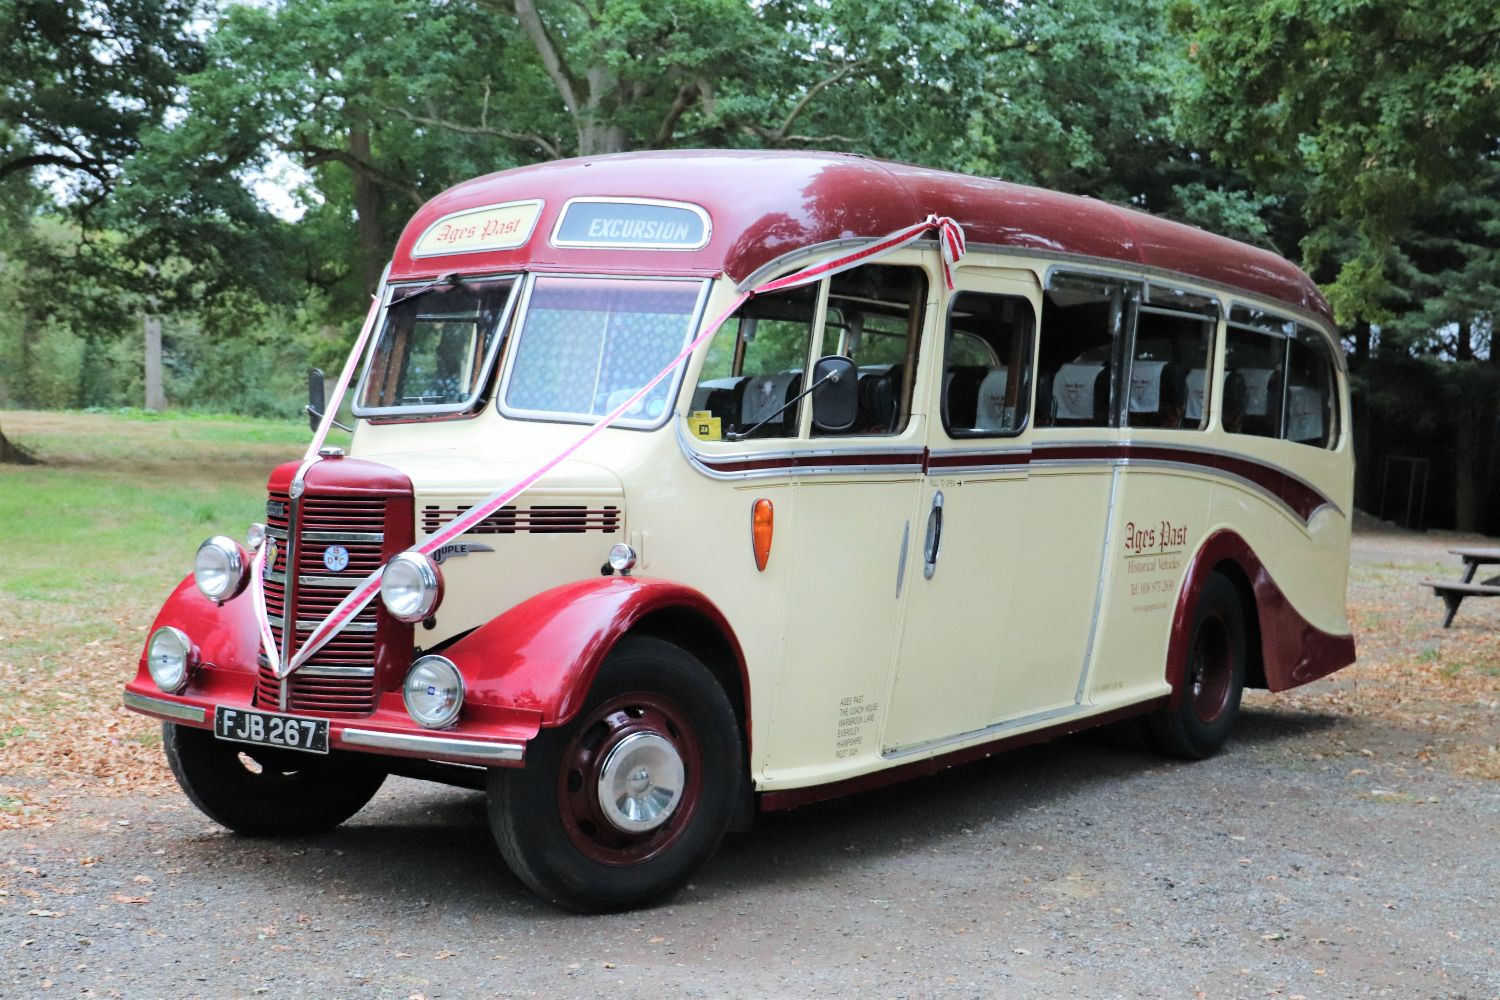 Bought at auction, the first OB purchased, and the only one to have been repainted since acquisition, was this 1949 example which had been new quite nearby to Age Past’s Eversley base to Townsend of Crowthorne